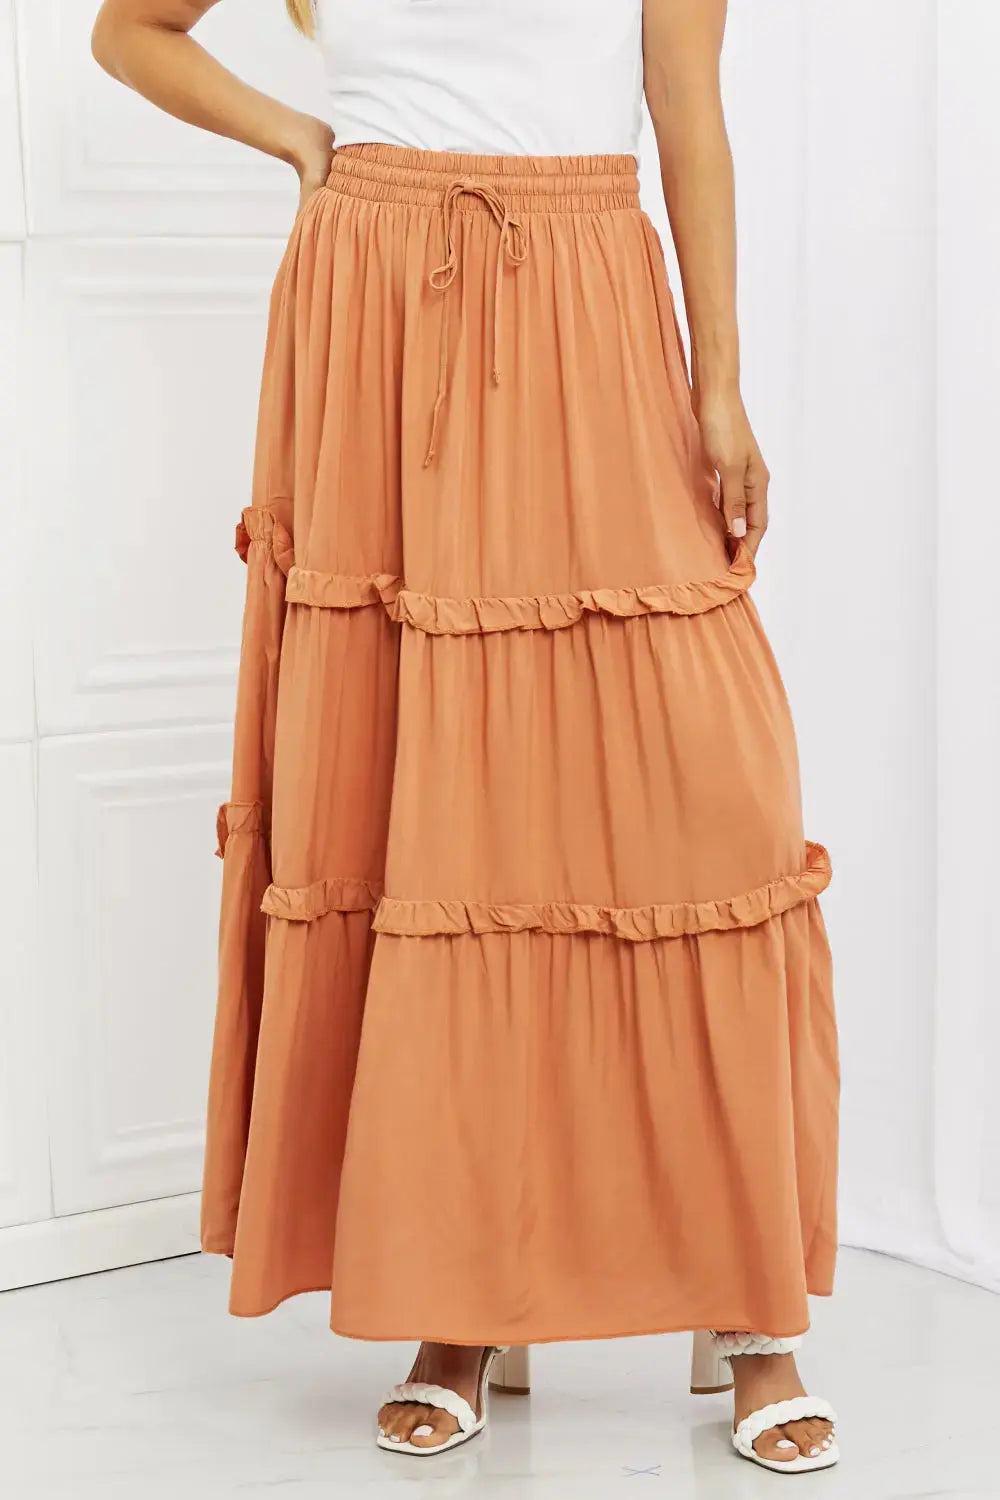 Summer Days Ruffled Maxi Skirt in Butter Orange  Southern Soul Collectives